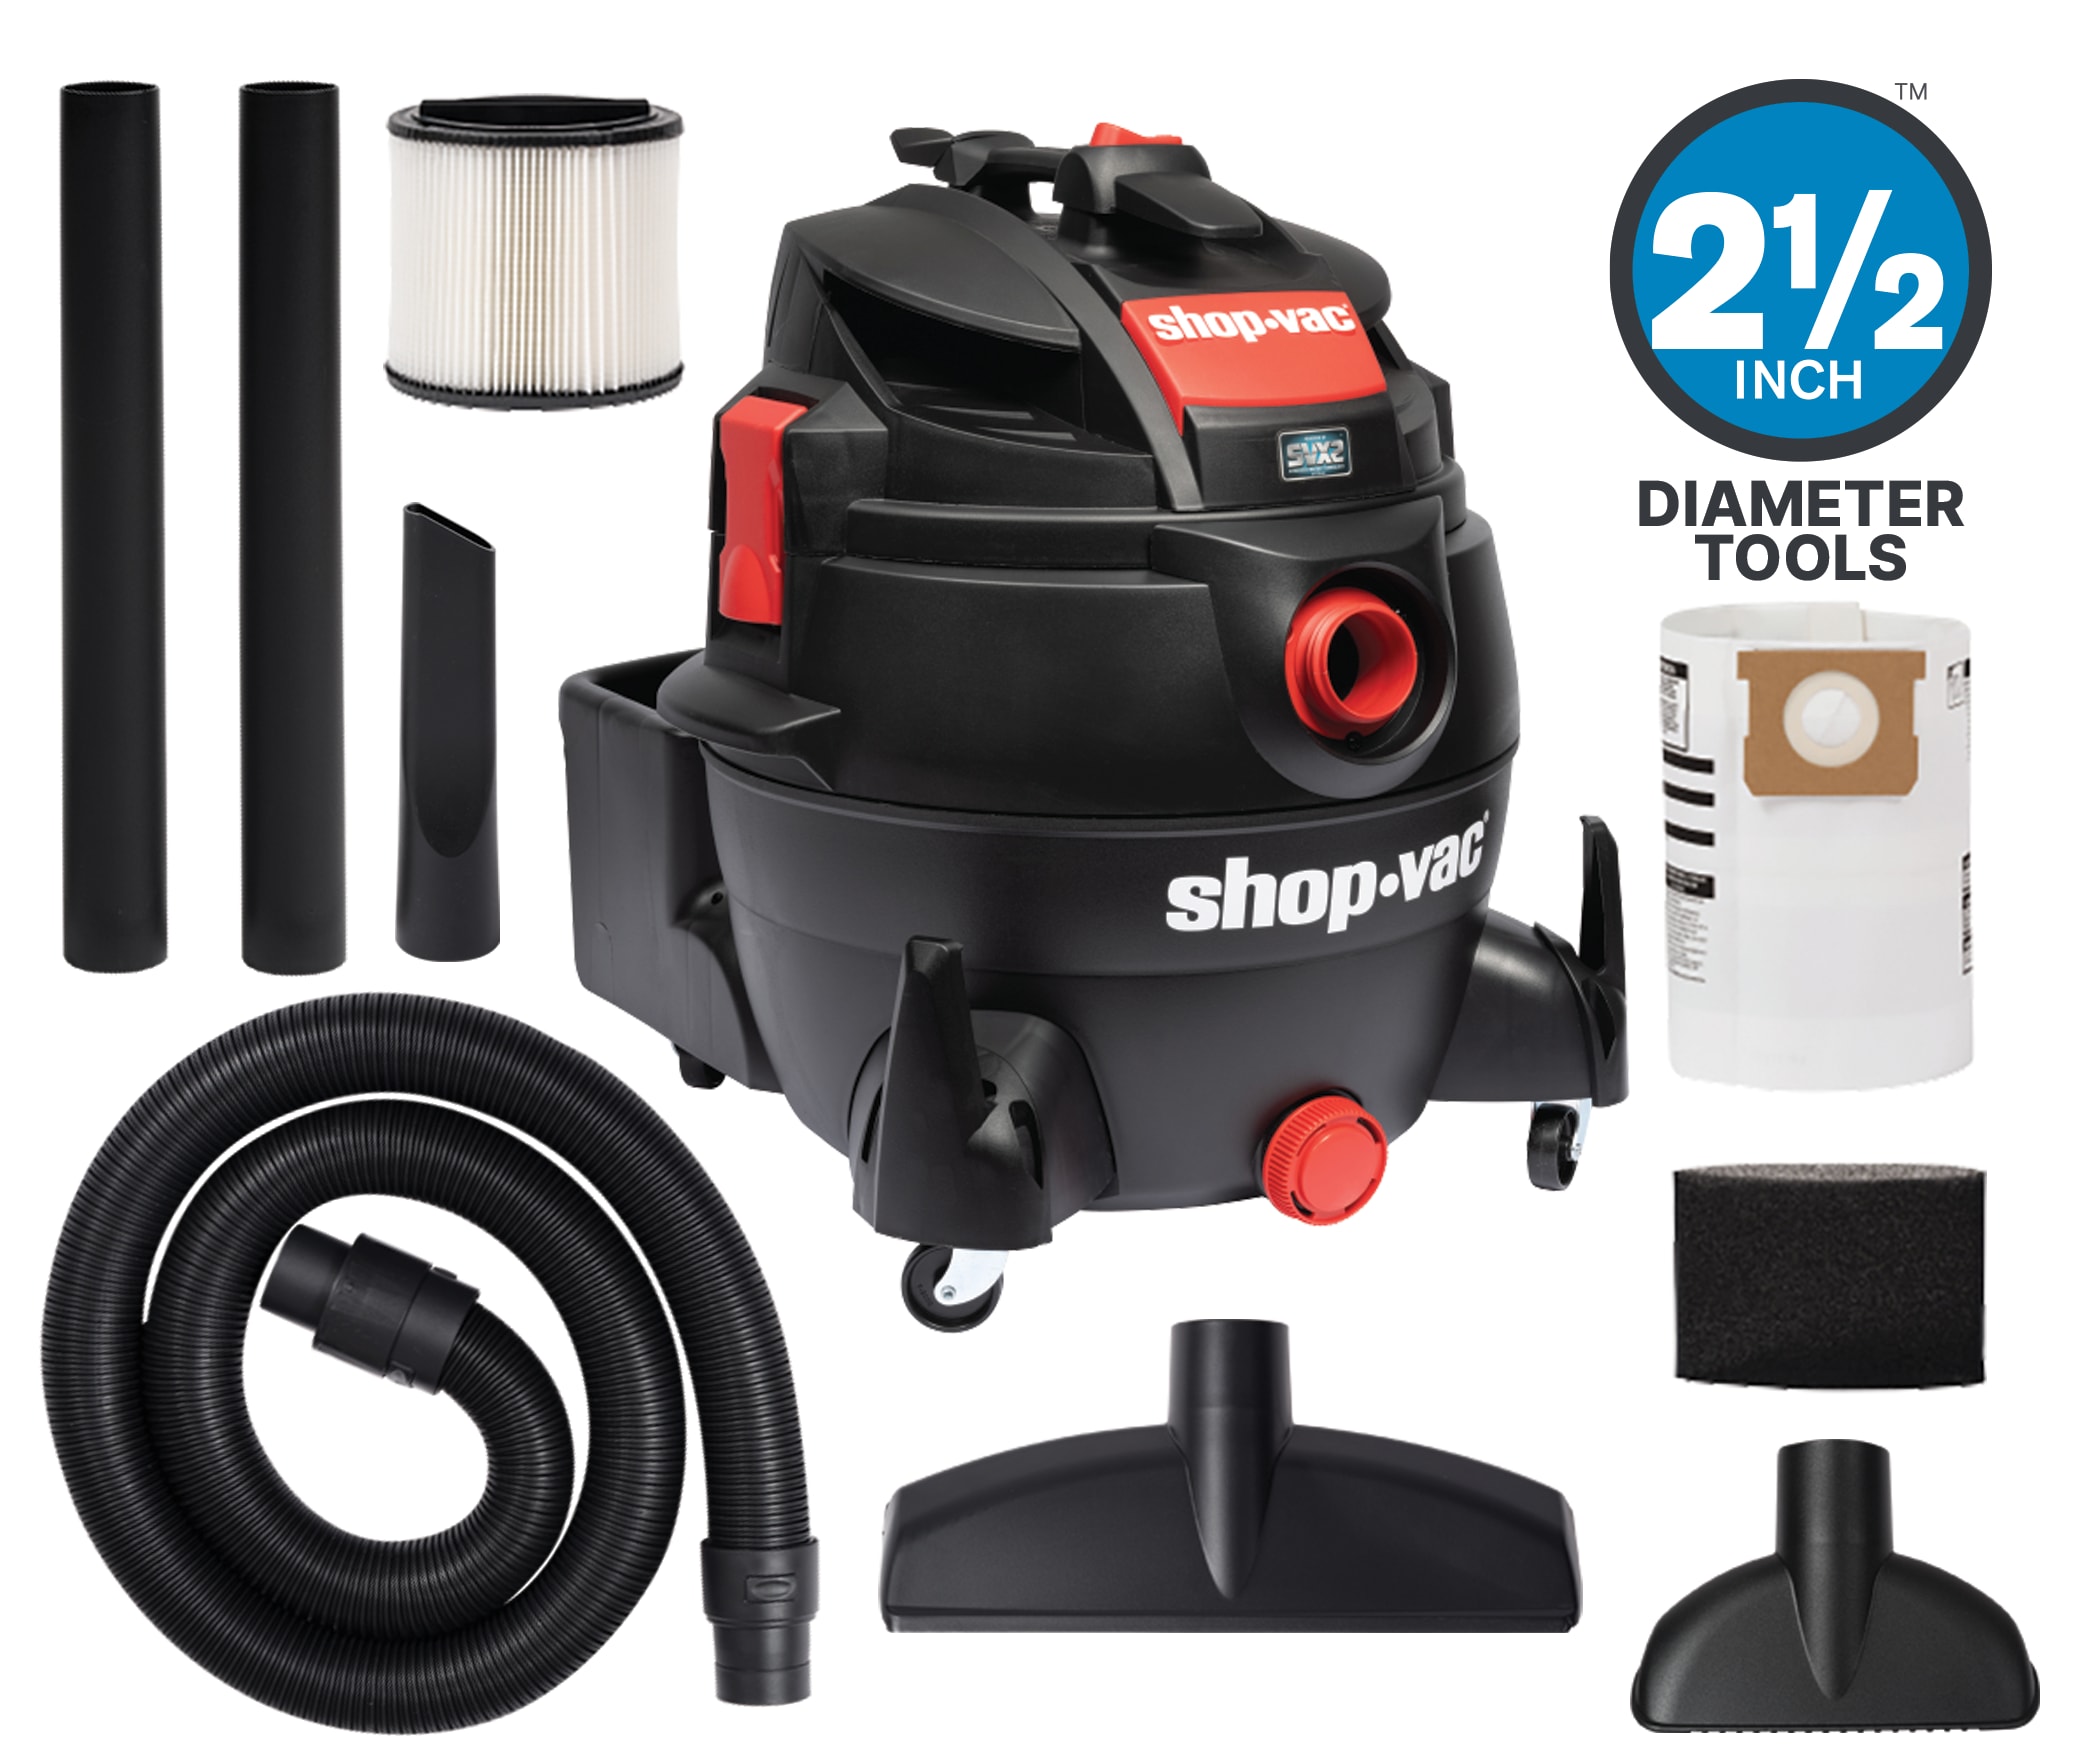 16-Gallons 6.5-HP Corded Shop Vacuum with Accessories Included | - Shop-Vac 5801611